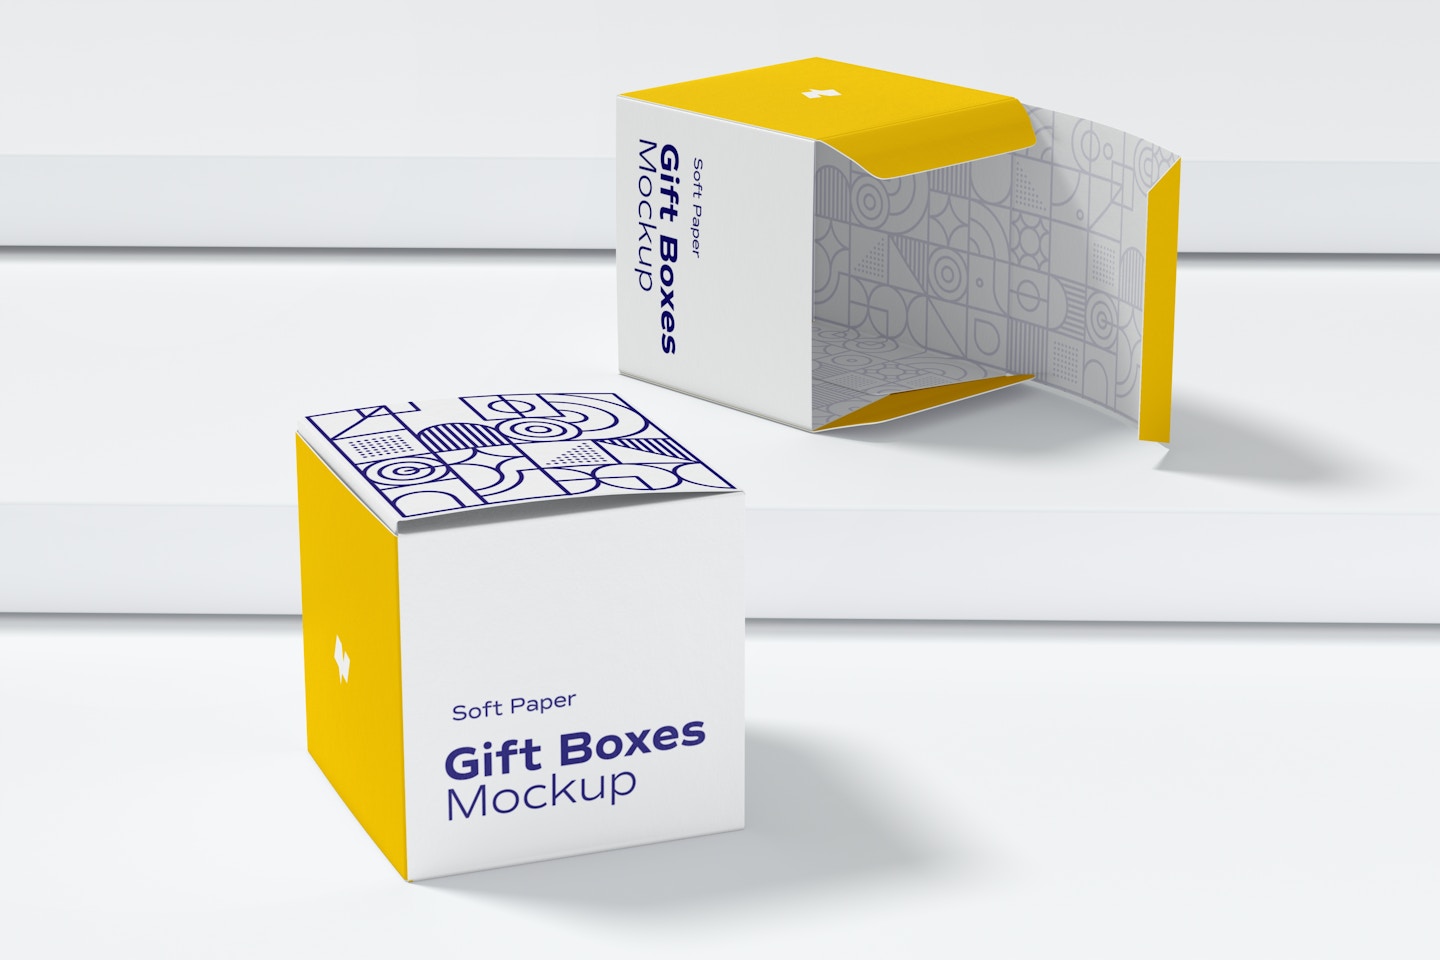 Soft Paper Gift Boxes Mockup, Perspective